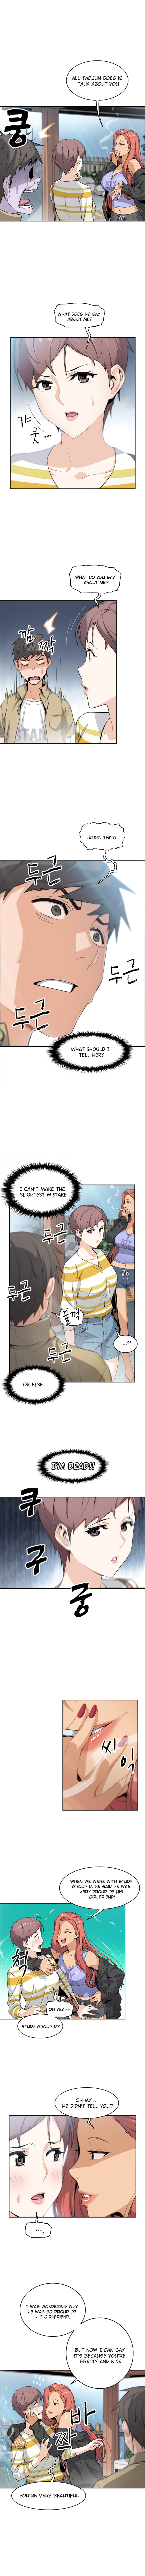 Housekeeper Manhwa - Chapter 3 Page 2